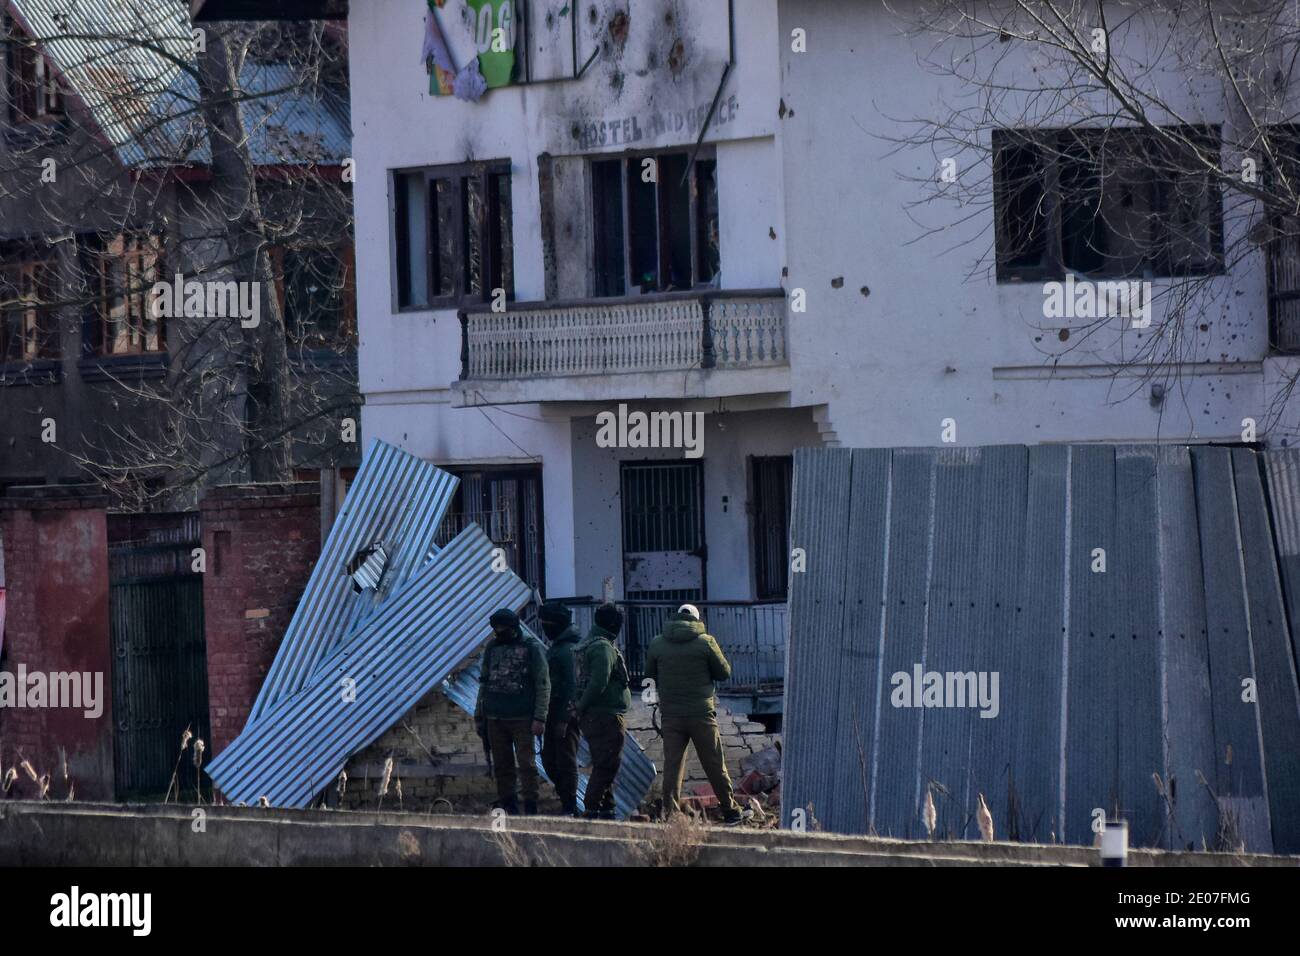 December 30, 2020: Indian forces remain outside the encounter site during an encounter with Millitants in HMT area of Srinagar, Indian Administered Kashmir on 30 December2020. Three millitants were killed in an overnight encounter with Indian Forces. Credit: Muzamil Mattoo/IMAGESLIVE/ZUMA Wire/Alamy Live News Stock Photo